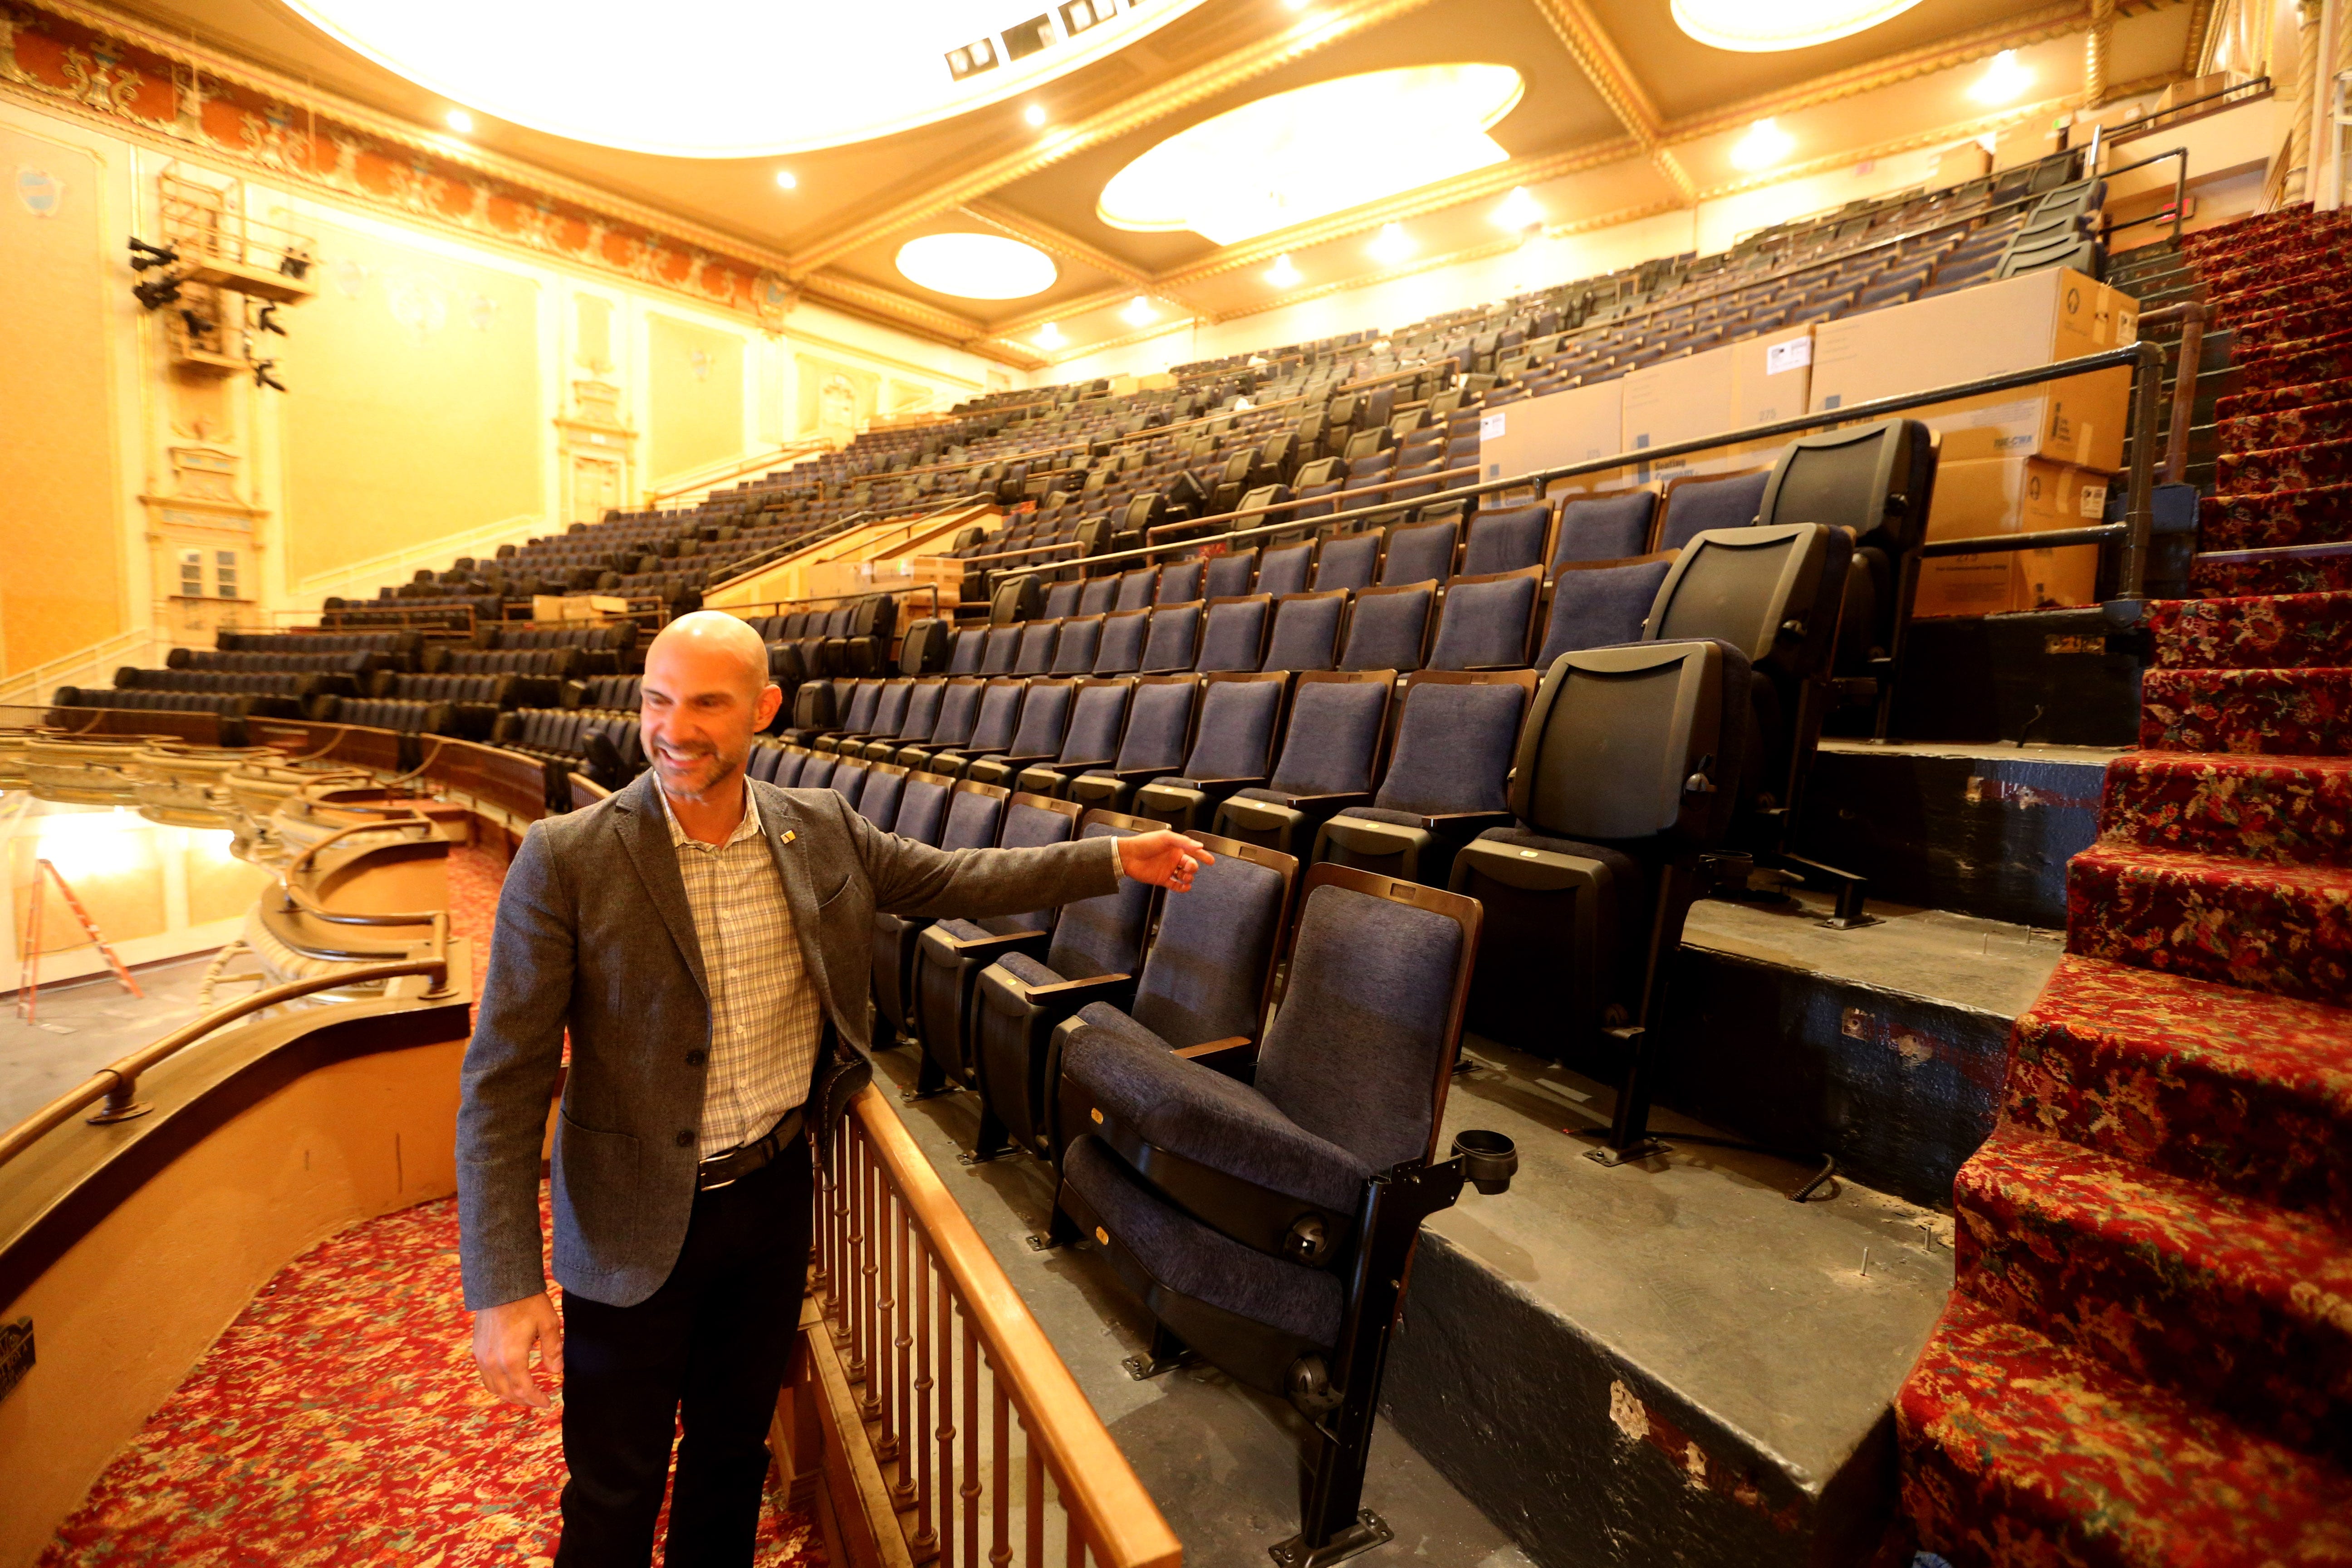 Aaron Perri, executive director of South Bend Venues, Parks & Arts, shows some of the newly installed seating in the balcony of the Morris Performing Arts Center. The Morris is undergoing a renovation of more than $8 million in time for the 100th anniversary of the venue.